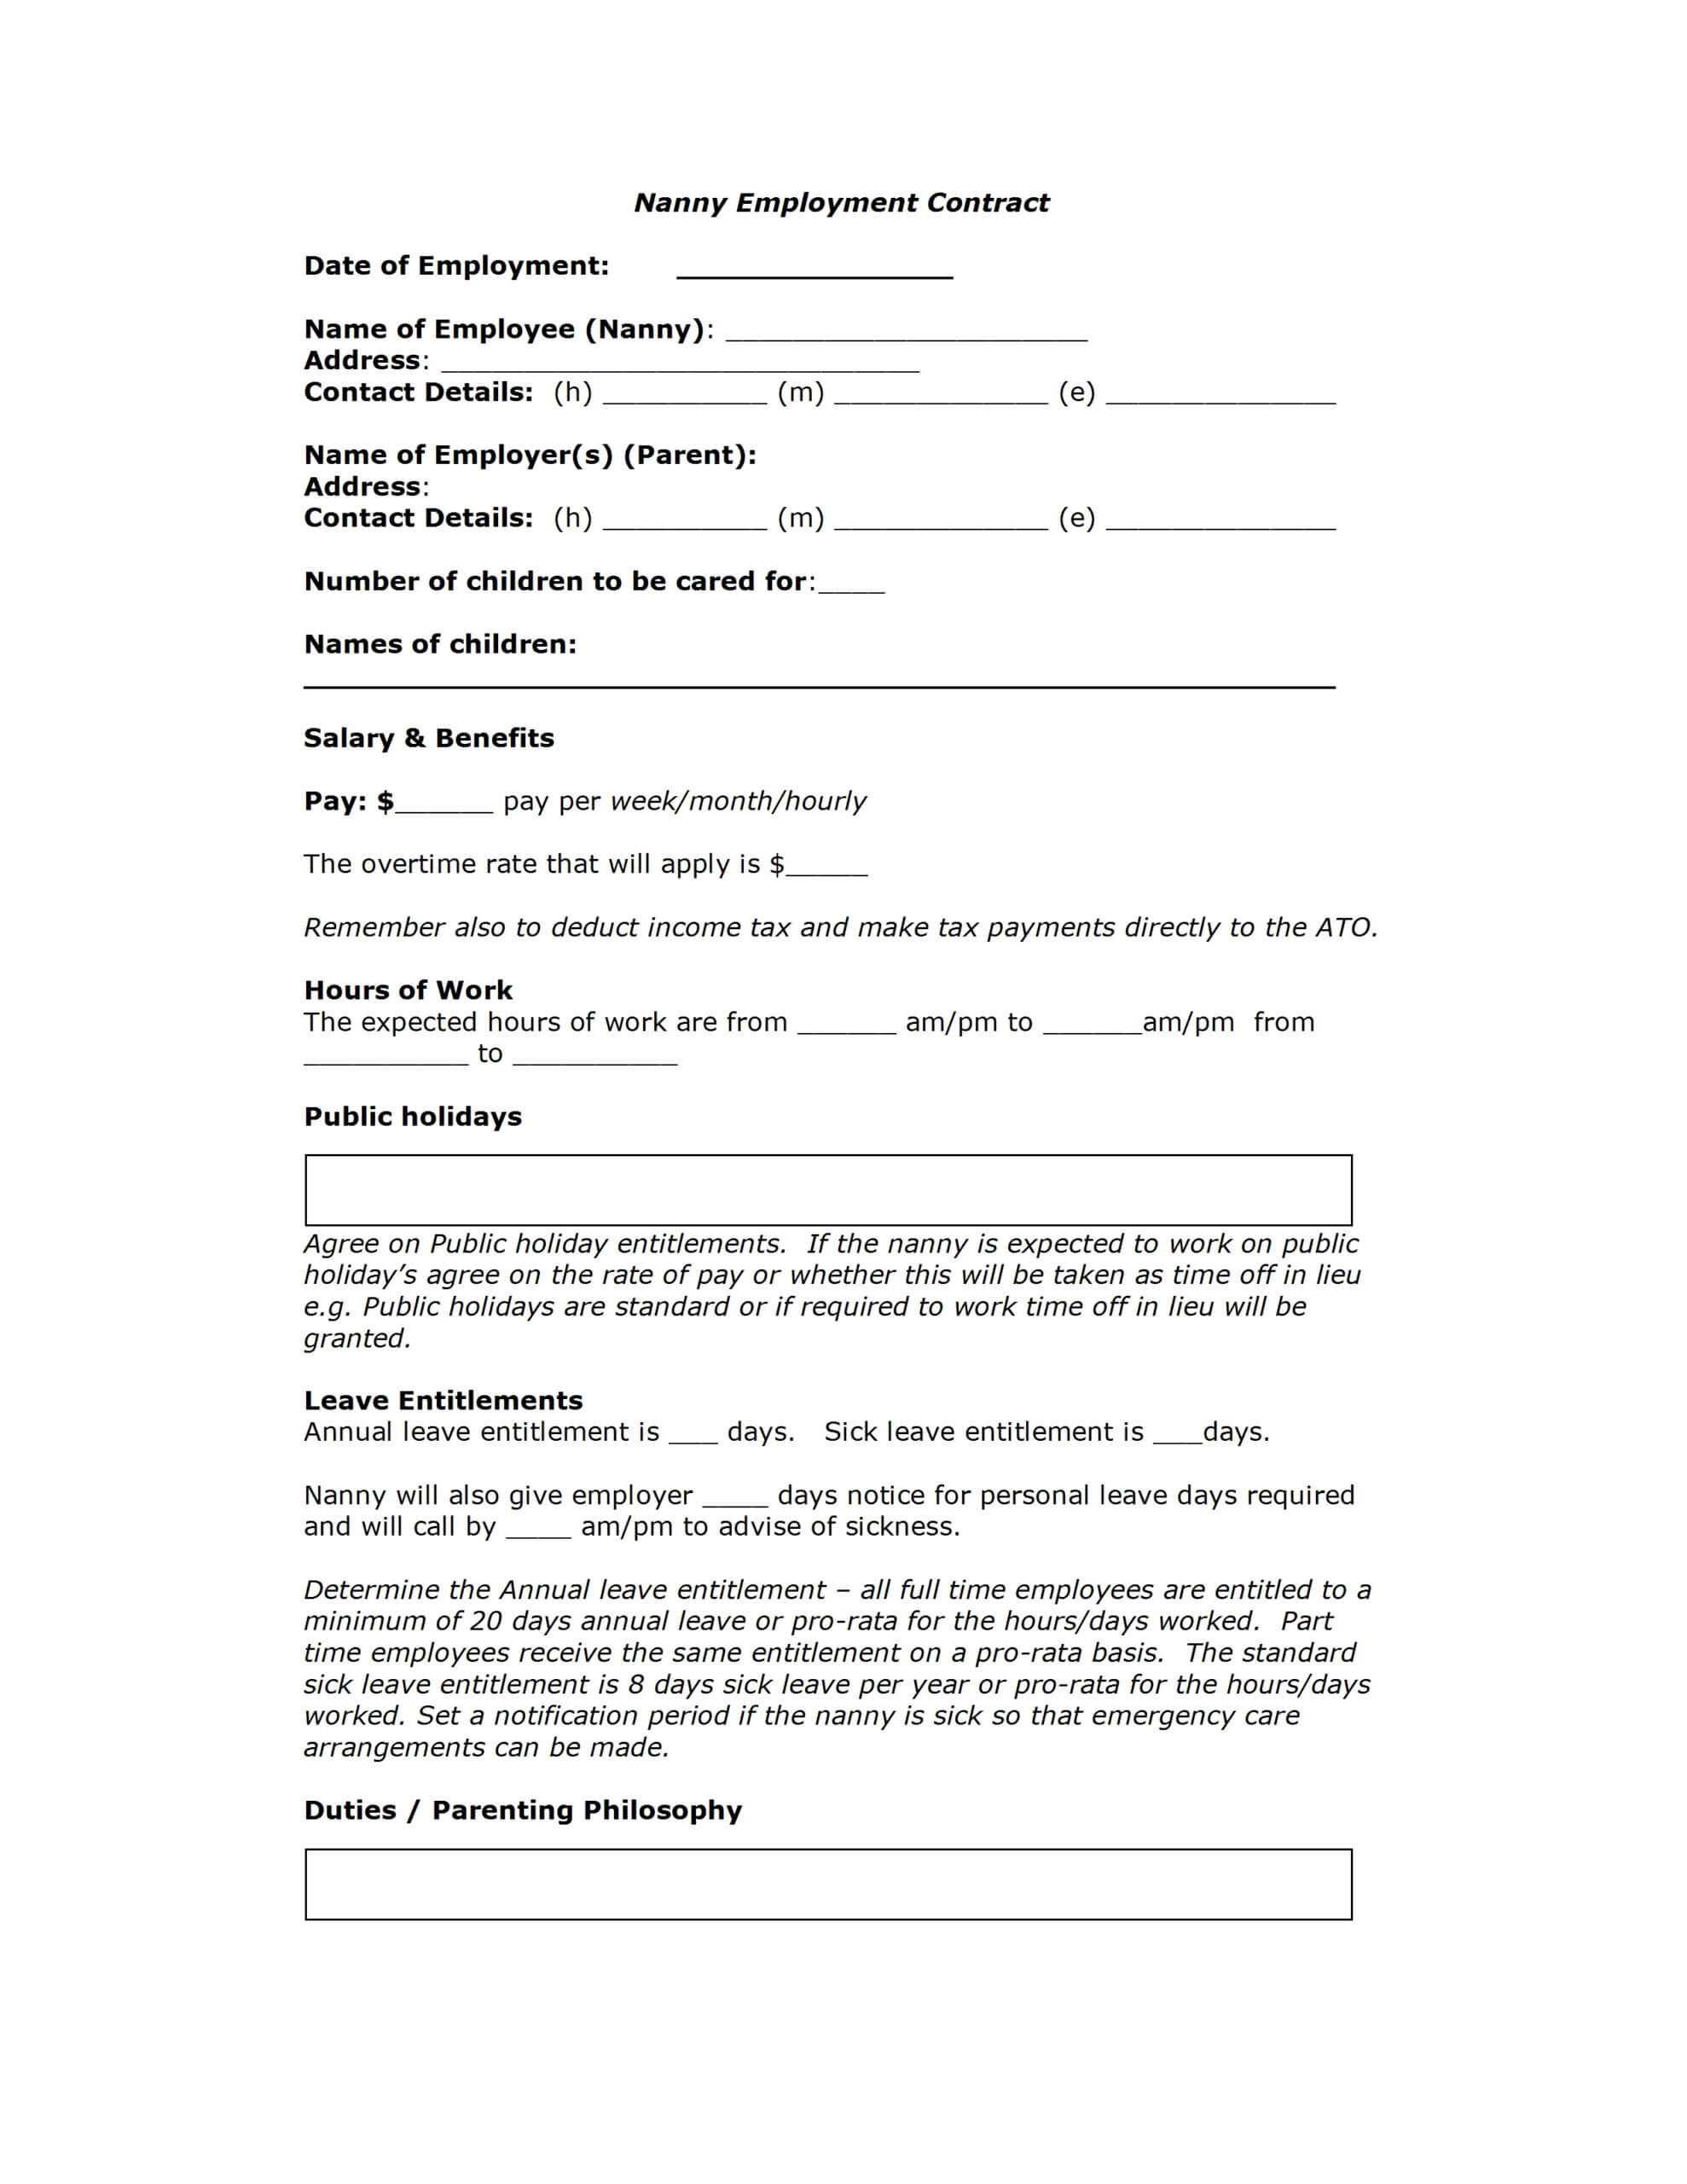 Contract Template For Nanny | Professional Resume Cv Maker For Nanny Contract Template Word